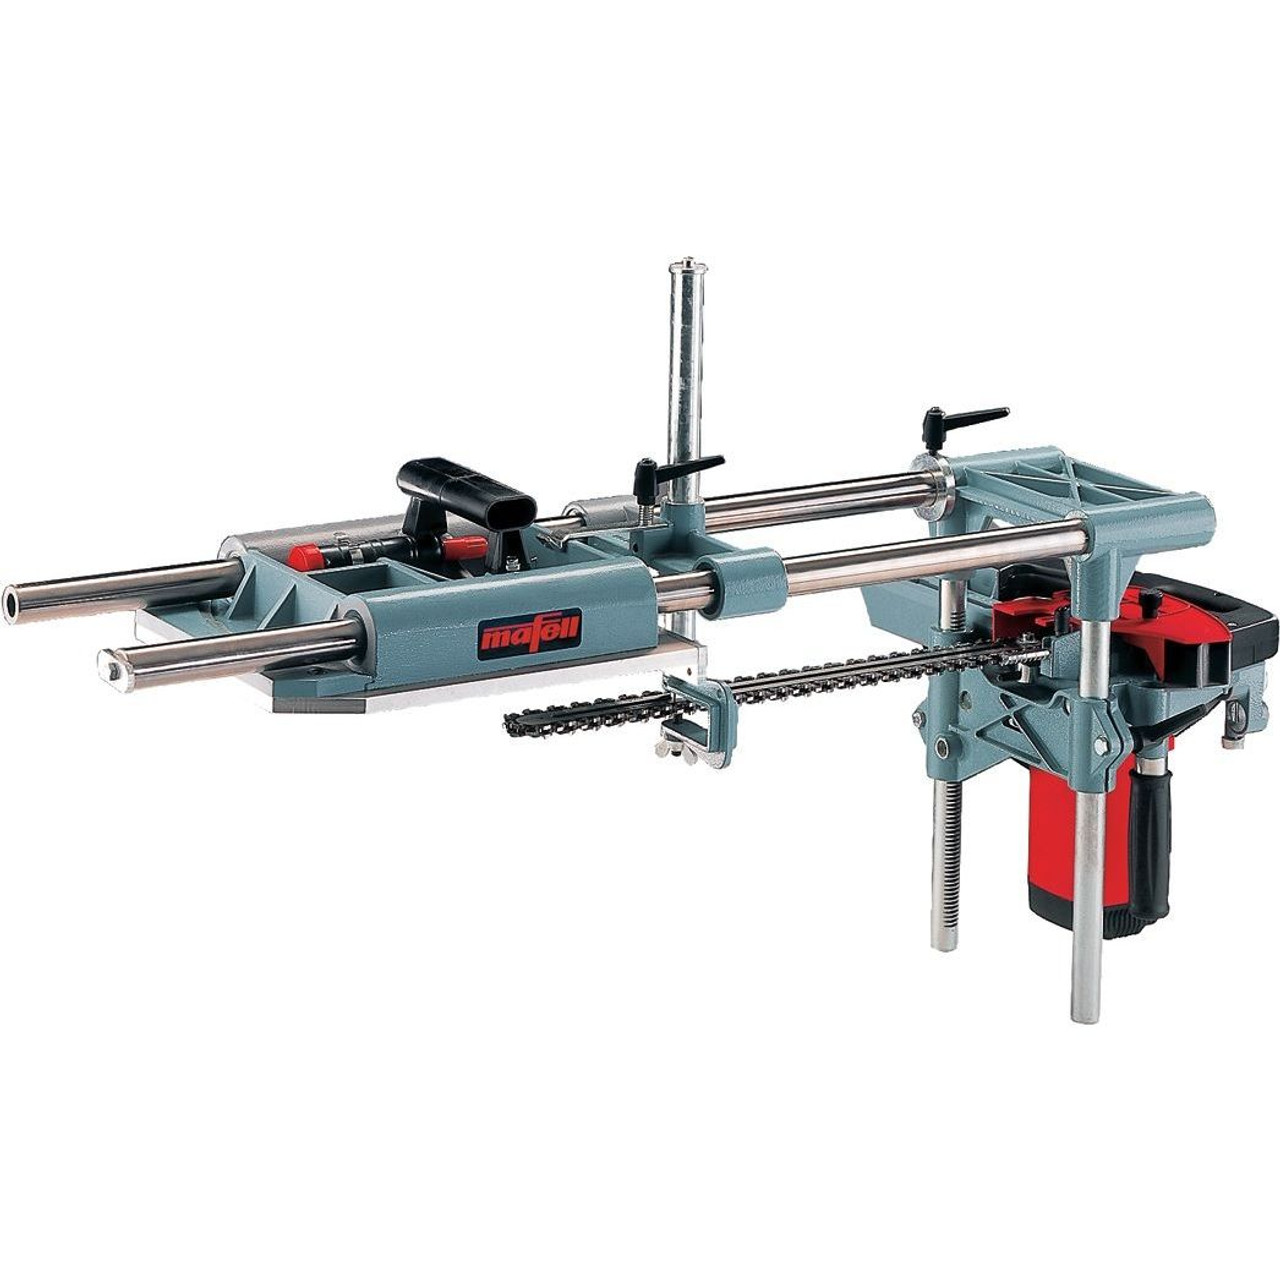 Buy online in Australia and New Zealand a MAFELL Spare Parts Chain Mortiser for Carpenters that perform exceptionally for Fabrication